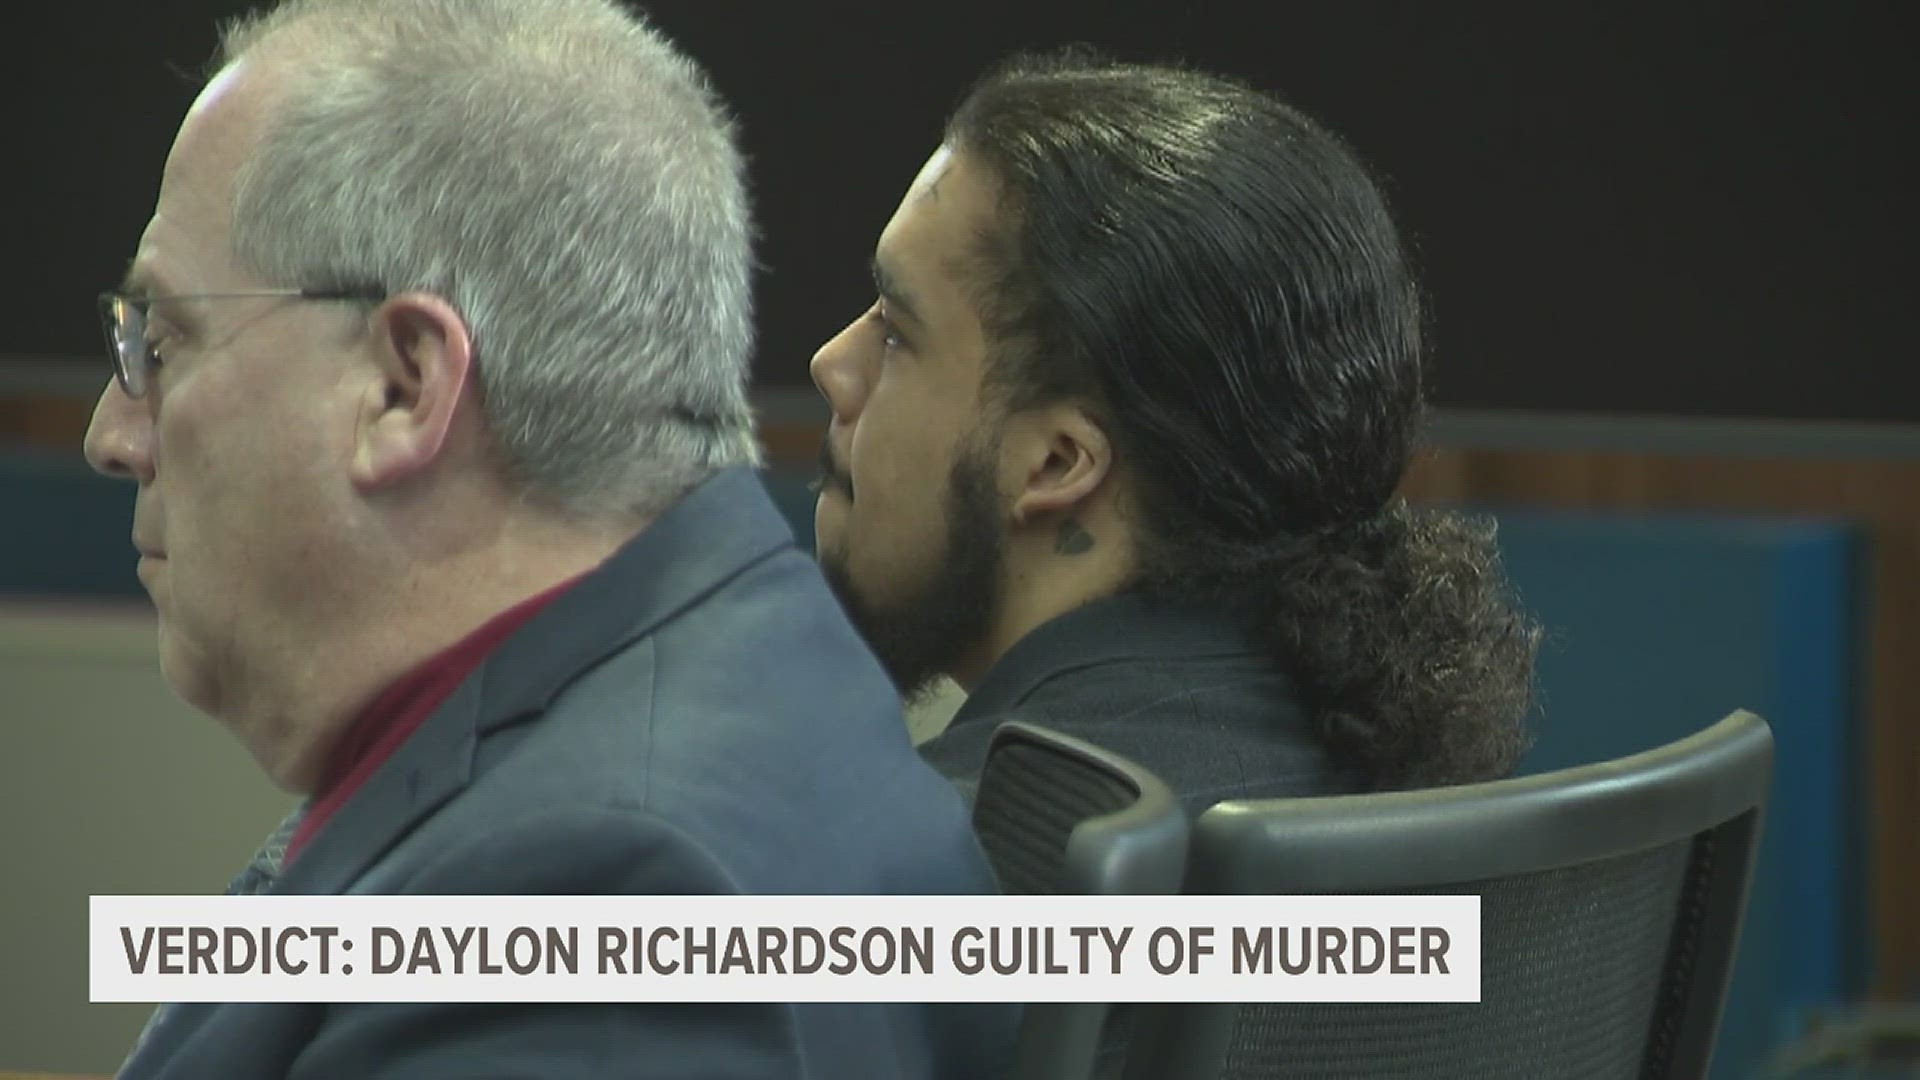 Daylon Richardson was found guilty on two counts of murder after hitting and killing Deputy Weist back in April 2022.